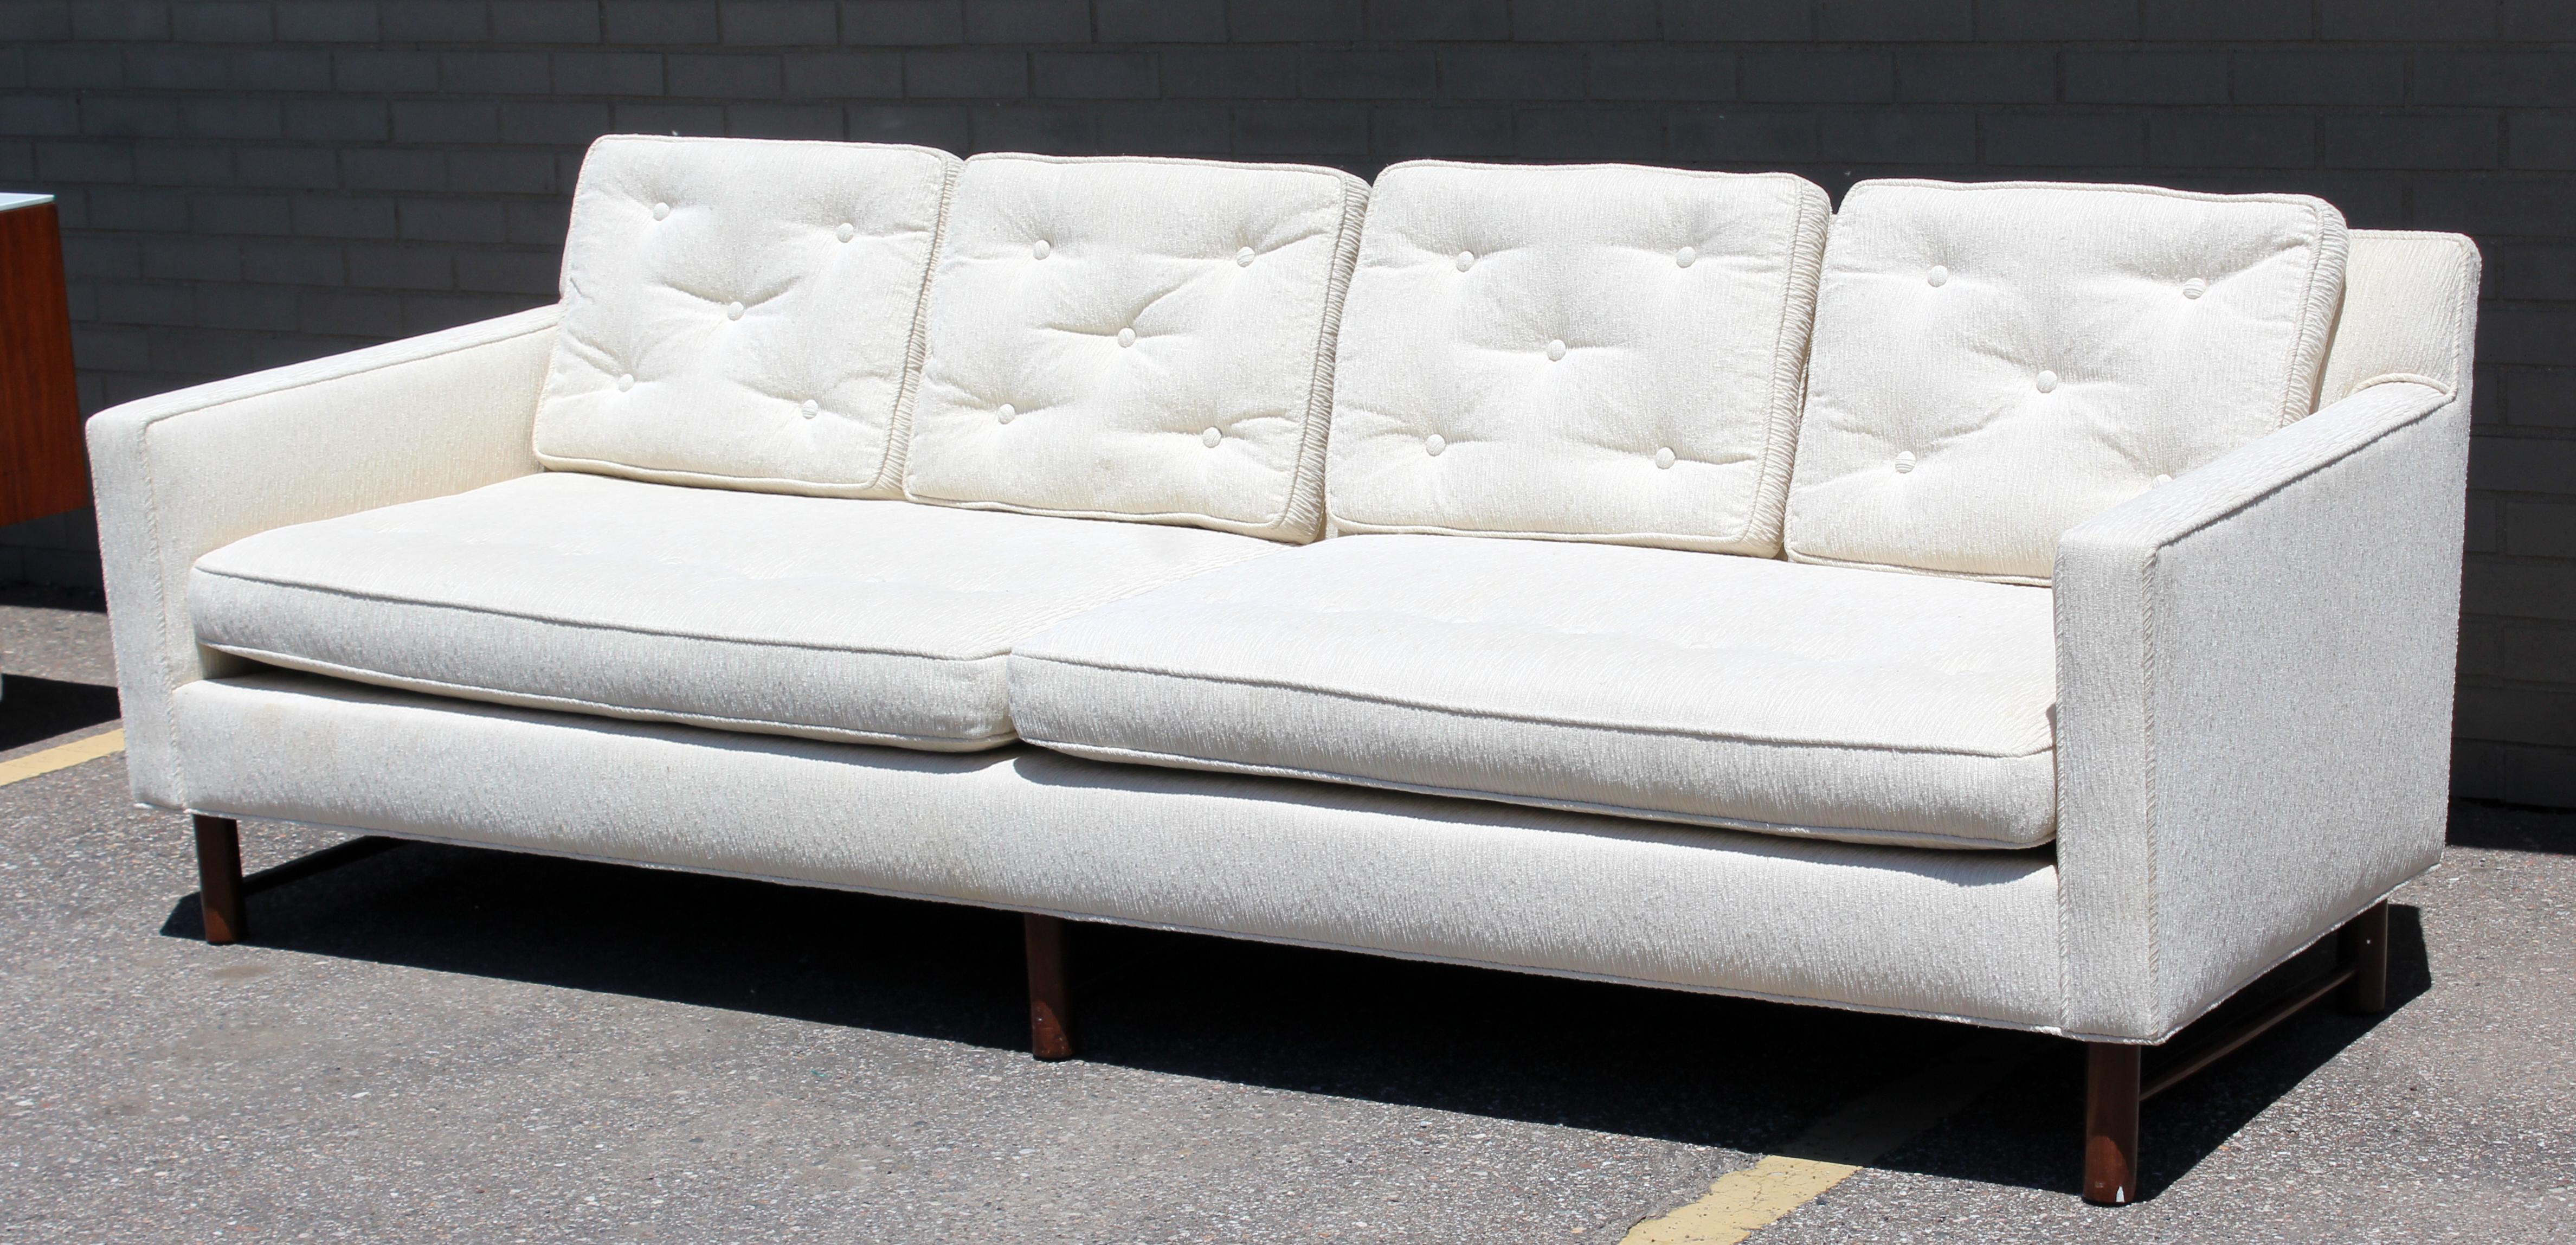 For your consideration is a fantastic, tufted, white sofa, on wooden legs, by Edward Wormley for Dunbar, model # 4907, circa 1960s. In very good condition. The dimensions are 90